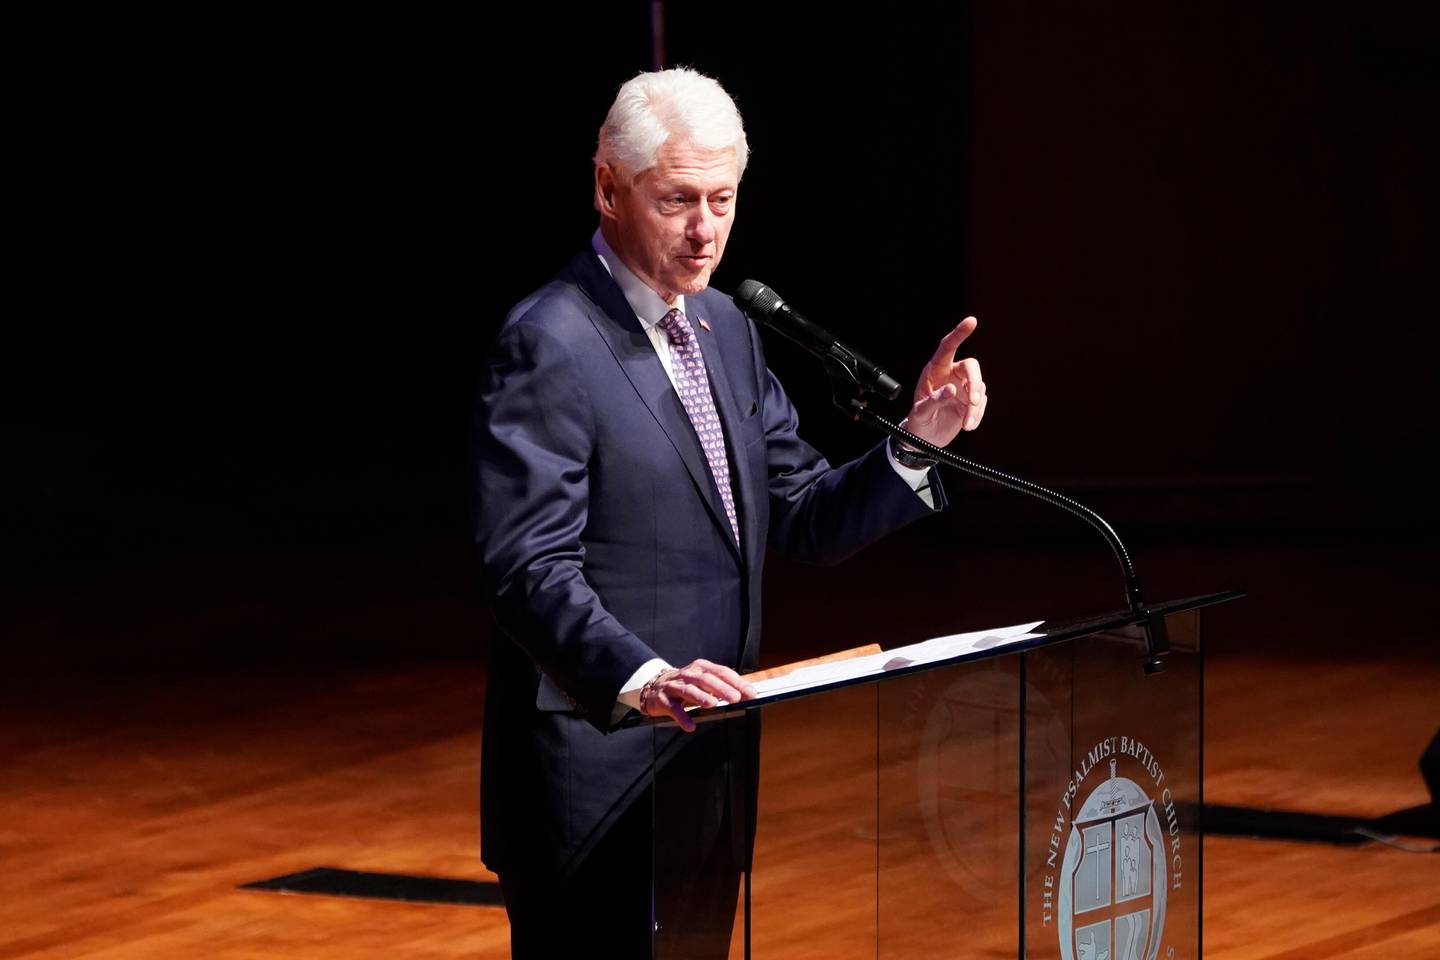 Former President Bill Clinton speaks during funeral services for U.S. Rep. Elijah Cummings, D-Md., at the New Psalmist Baptist Church in Baltimore, Md., on Friday, Oct. 25, 2019. (Joshua Roberts/Pool via AP)